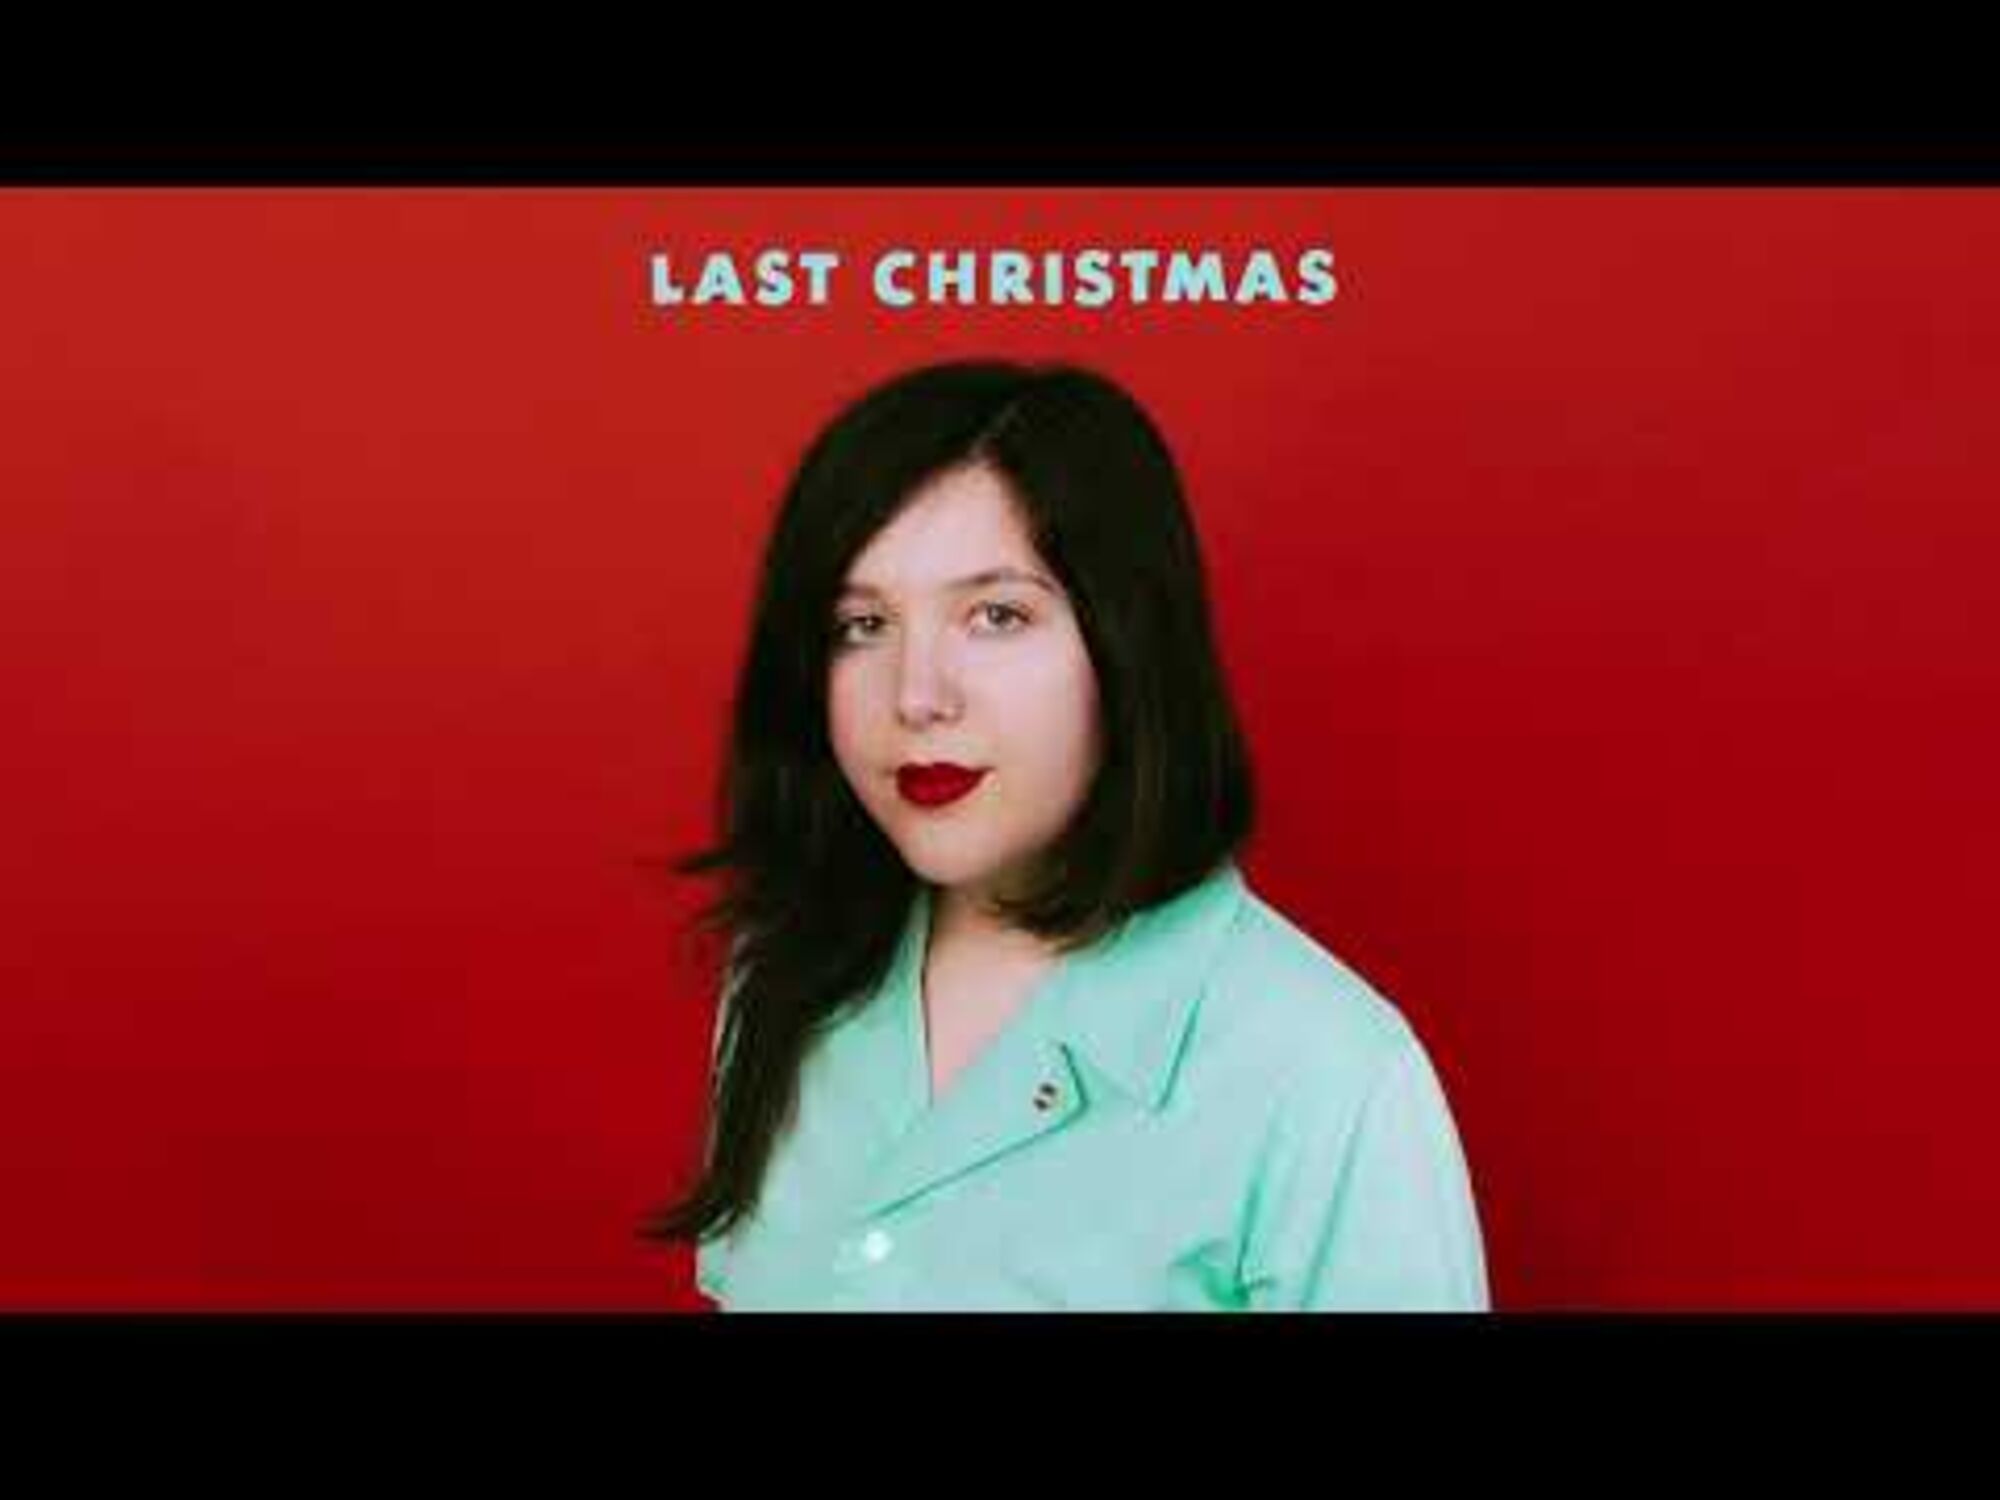 Lucy Dacus - "Last Christmas" (Wham! cover)